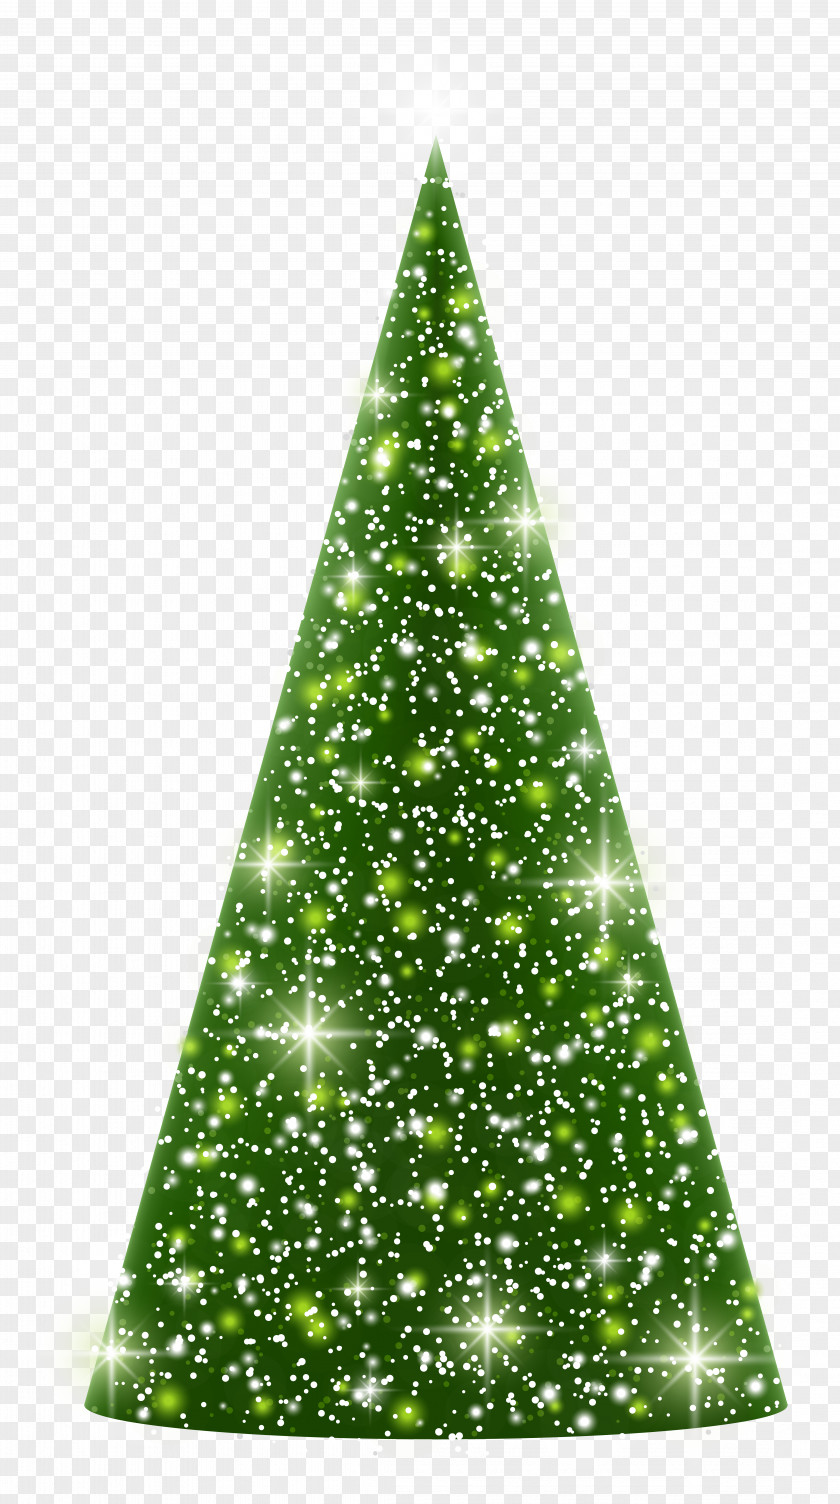 Christmas Decorations Clip Art Image Tree Fir PNG